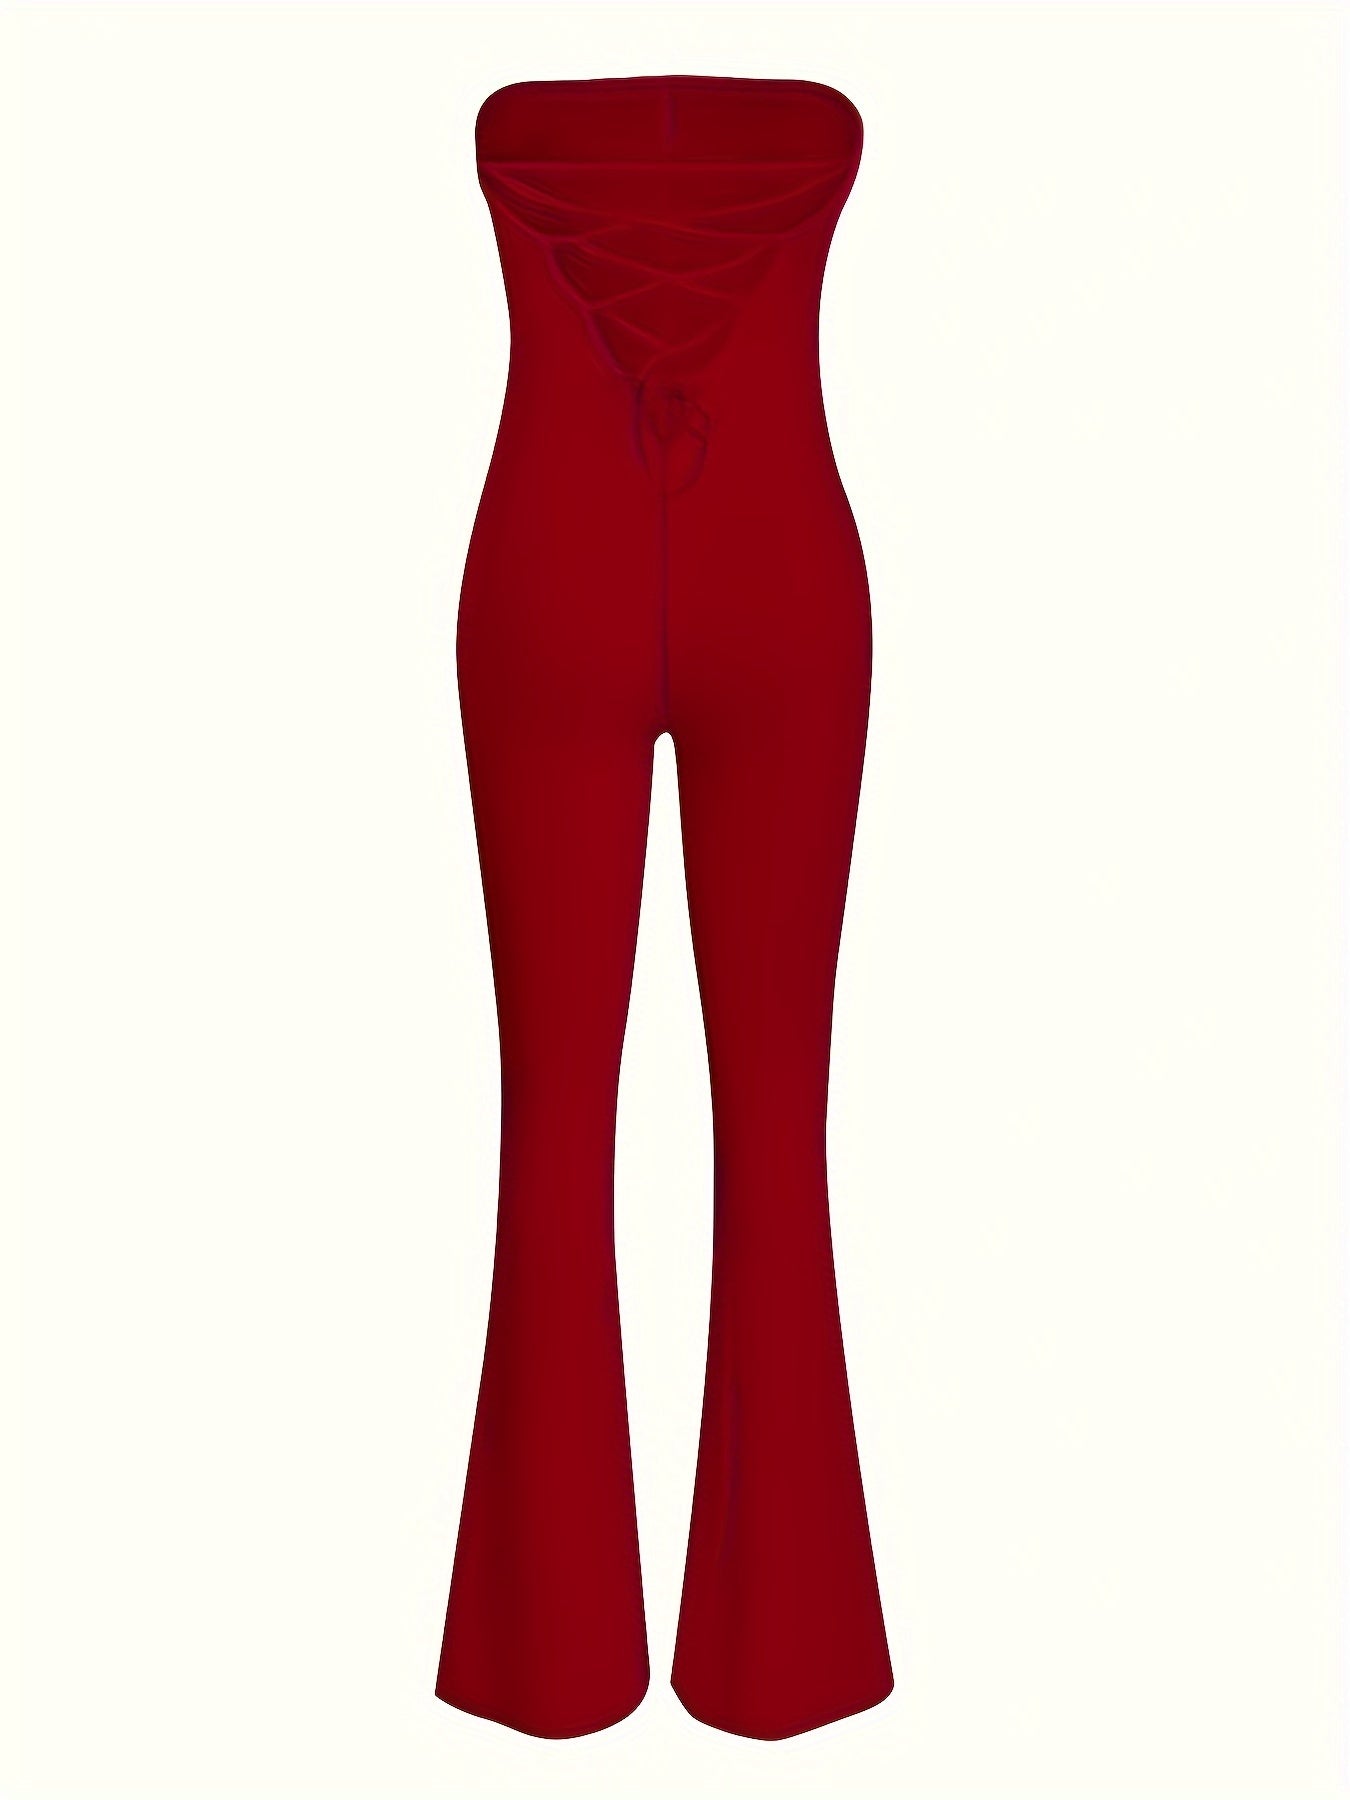 realaiot  Tie Back Off Shoulder Jumpsuit, Party Wear Solid Flared Leg Jumpsuit, Women's Clothing